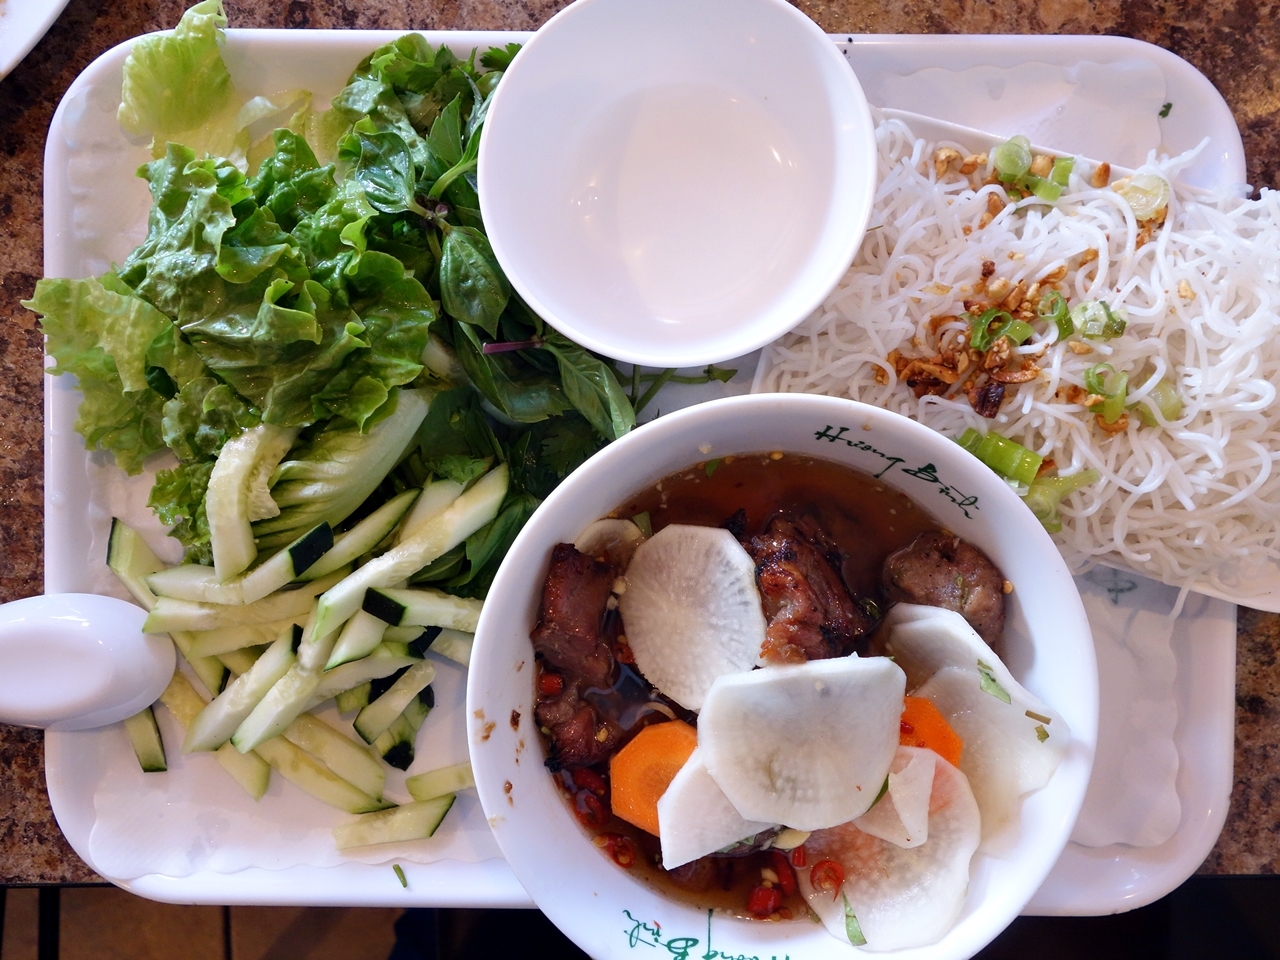 A platter with vermicelli noodles, cucumber matchsticks, shredded lettuce, grilled meat, and pickled sliced radish and carrots.